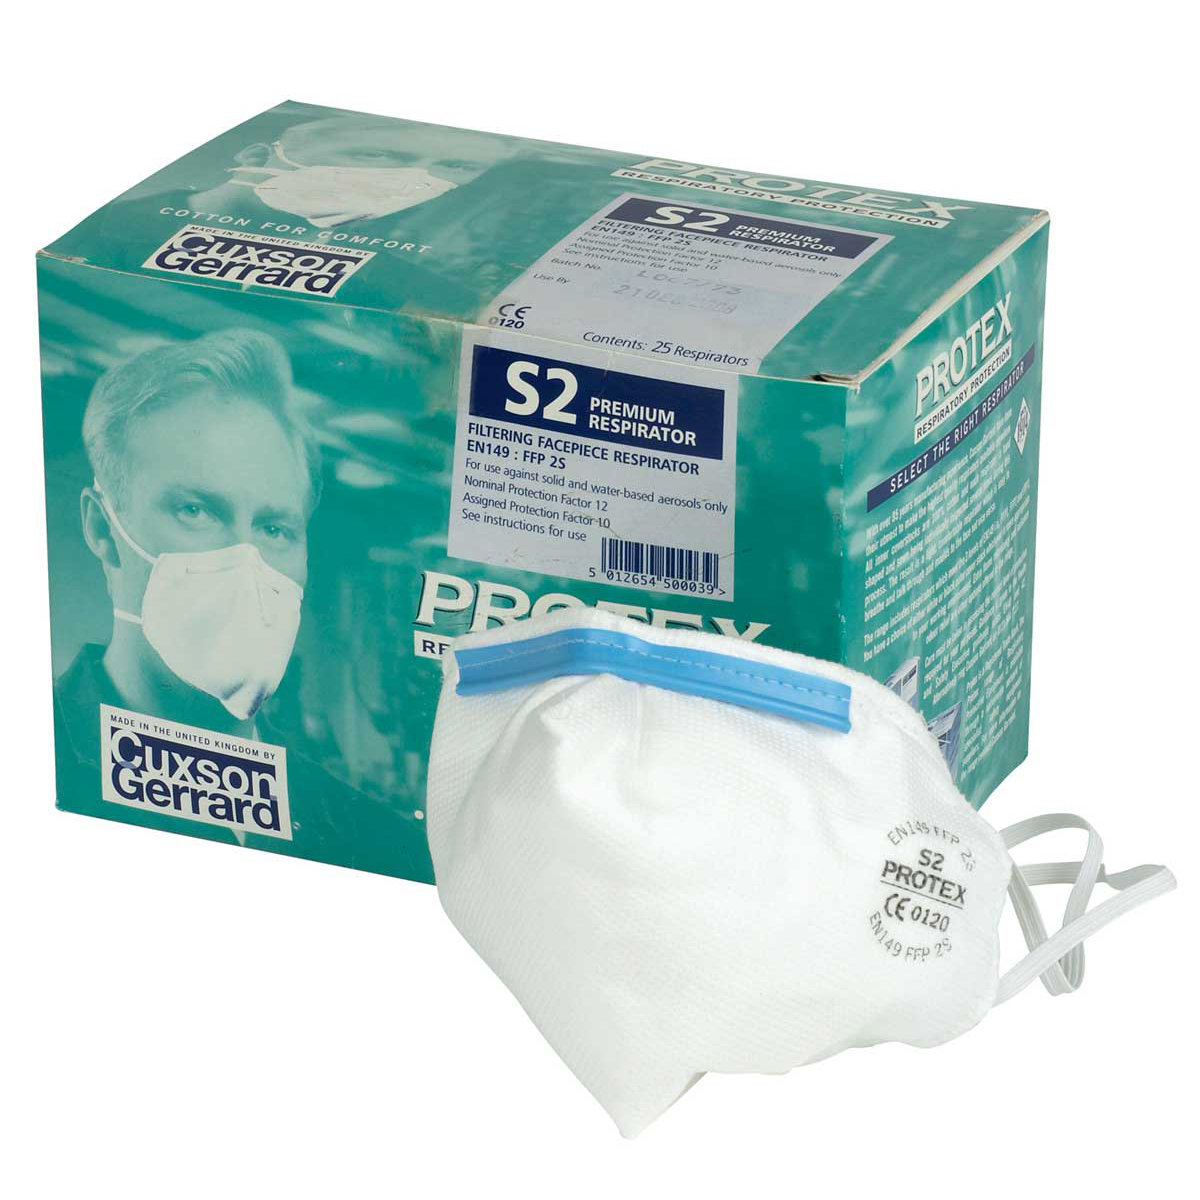 Pack of 25 Protex S2 Respiratory Mask